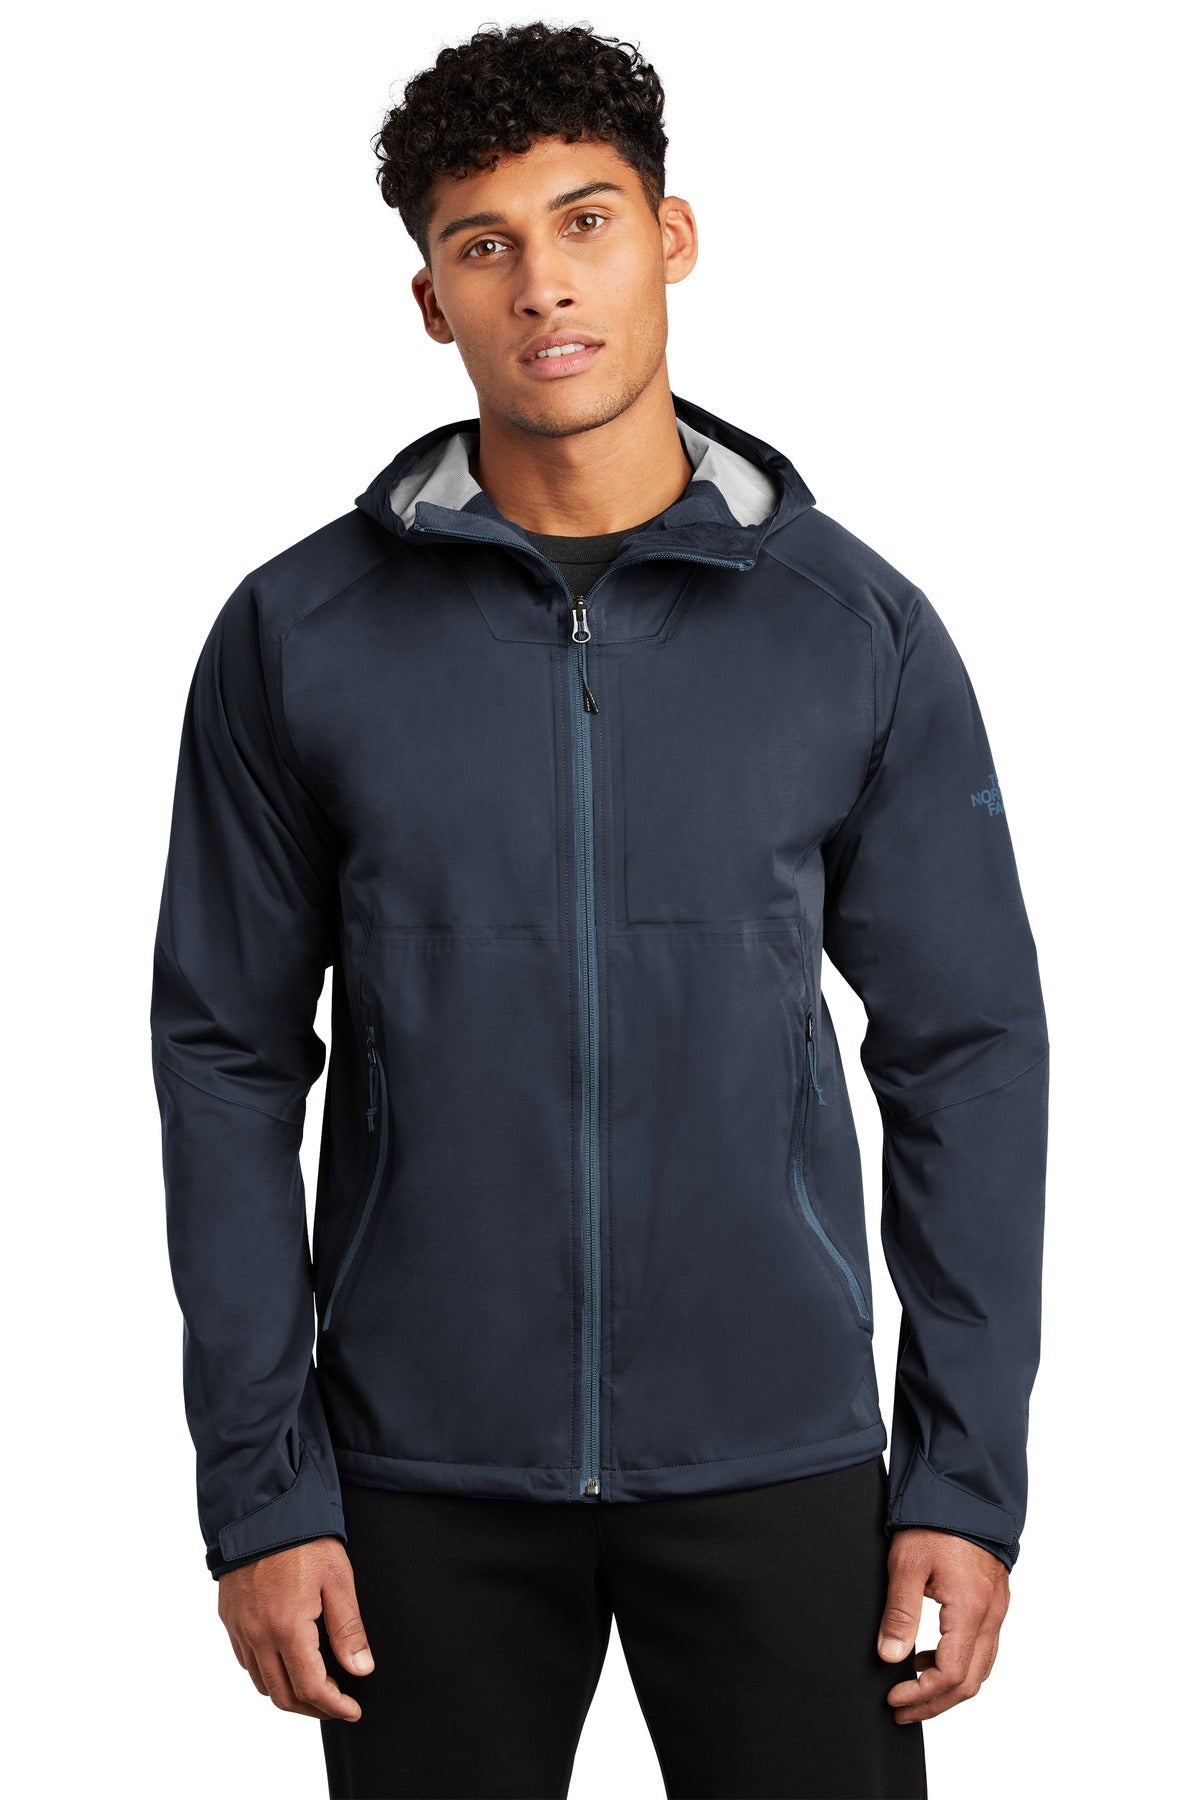 The North Face ® All-Weather DryVent ™ Stretch Jacket NF0A47FG - DFW Impression